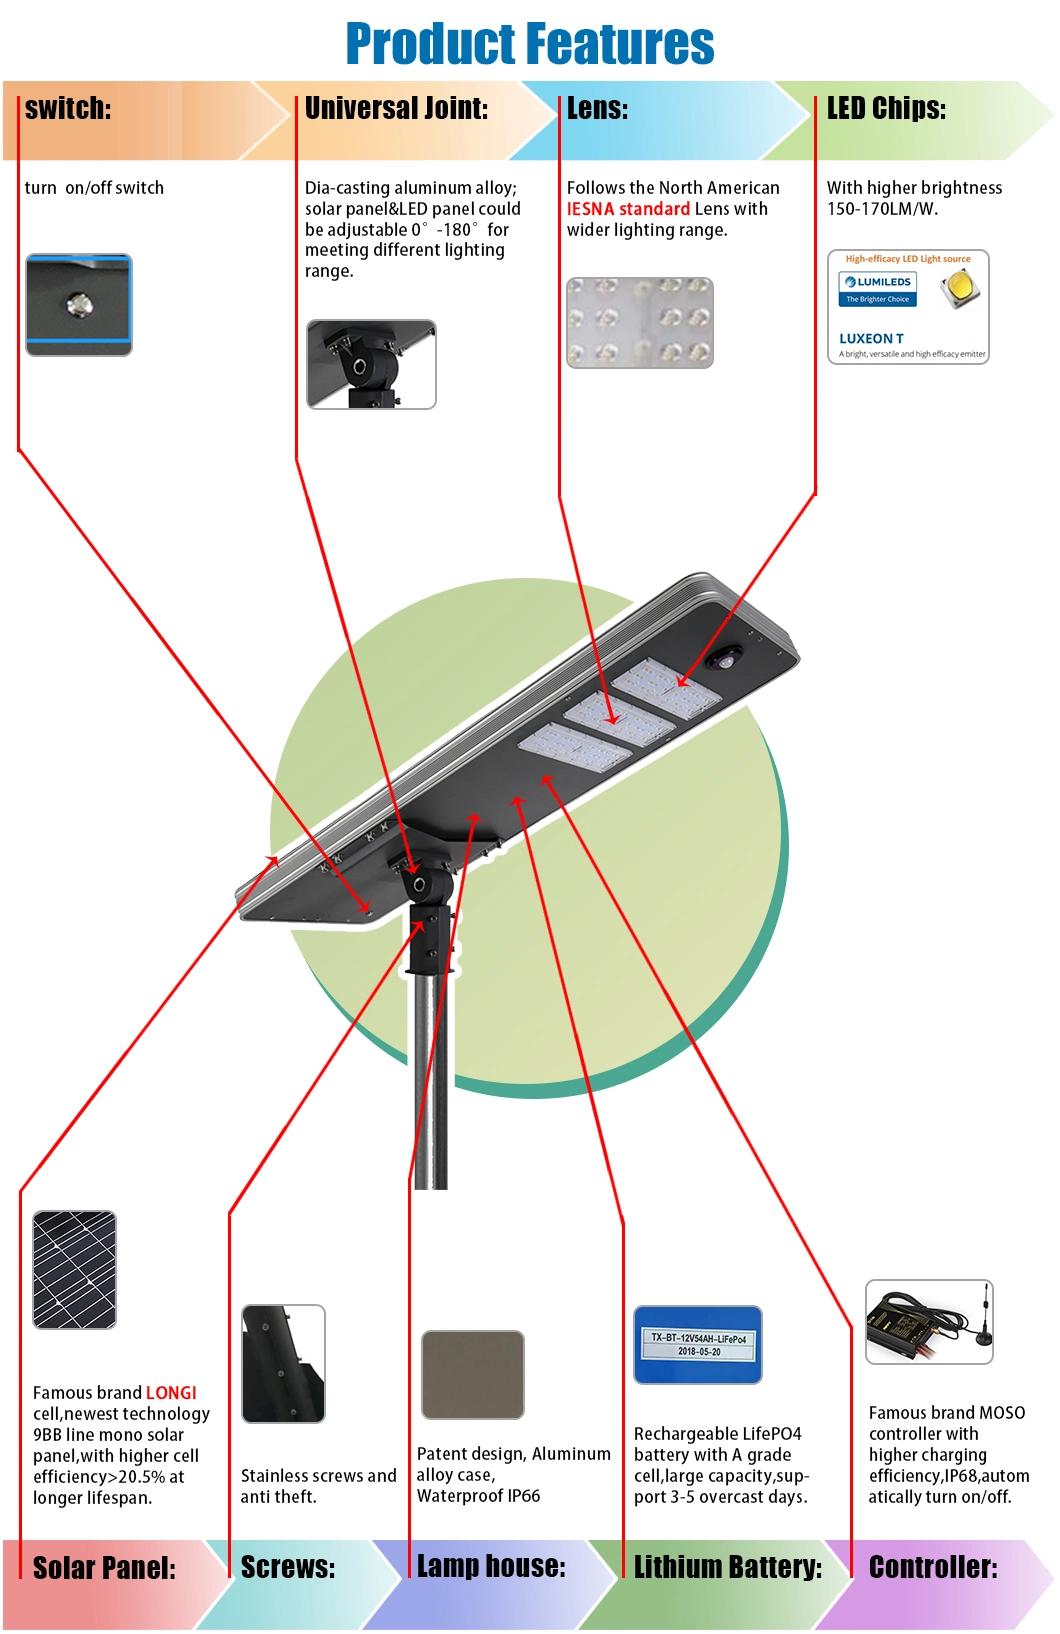 IP65 Waterproof 80W 100W All in One/Integrated Energy Saving Solar LED Street Light with Motion/PIR Sensor System